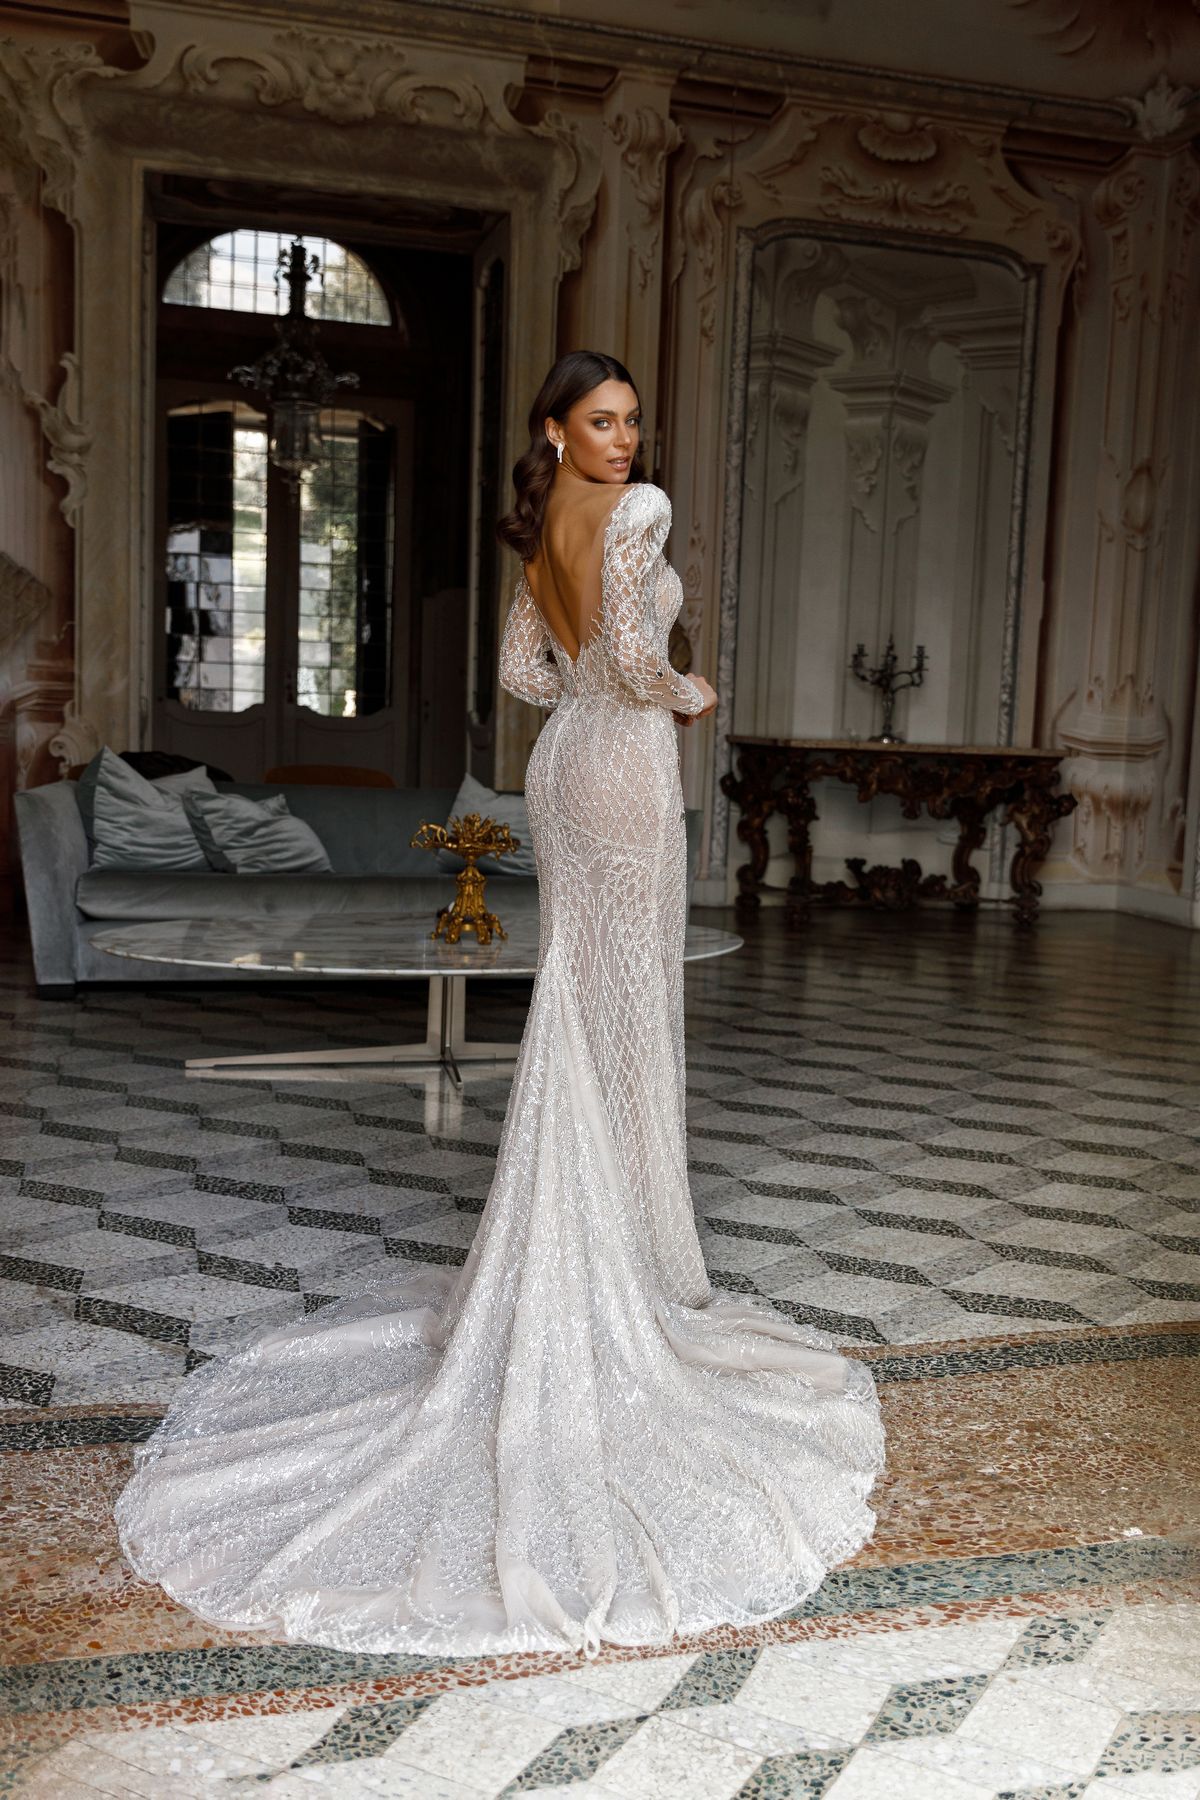 Fitted silhouette lace Maya wedding dress by Oksana Mukha embroidered with Swarovski crystals, long sleeves and detachable overskirt at Dell'Amore Bridal, Auckland, NZ 10